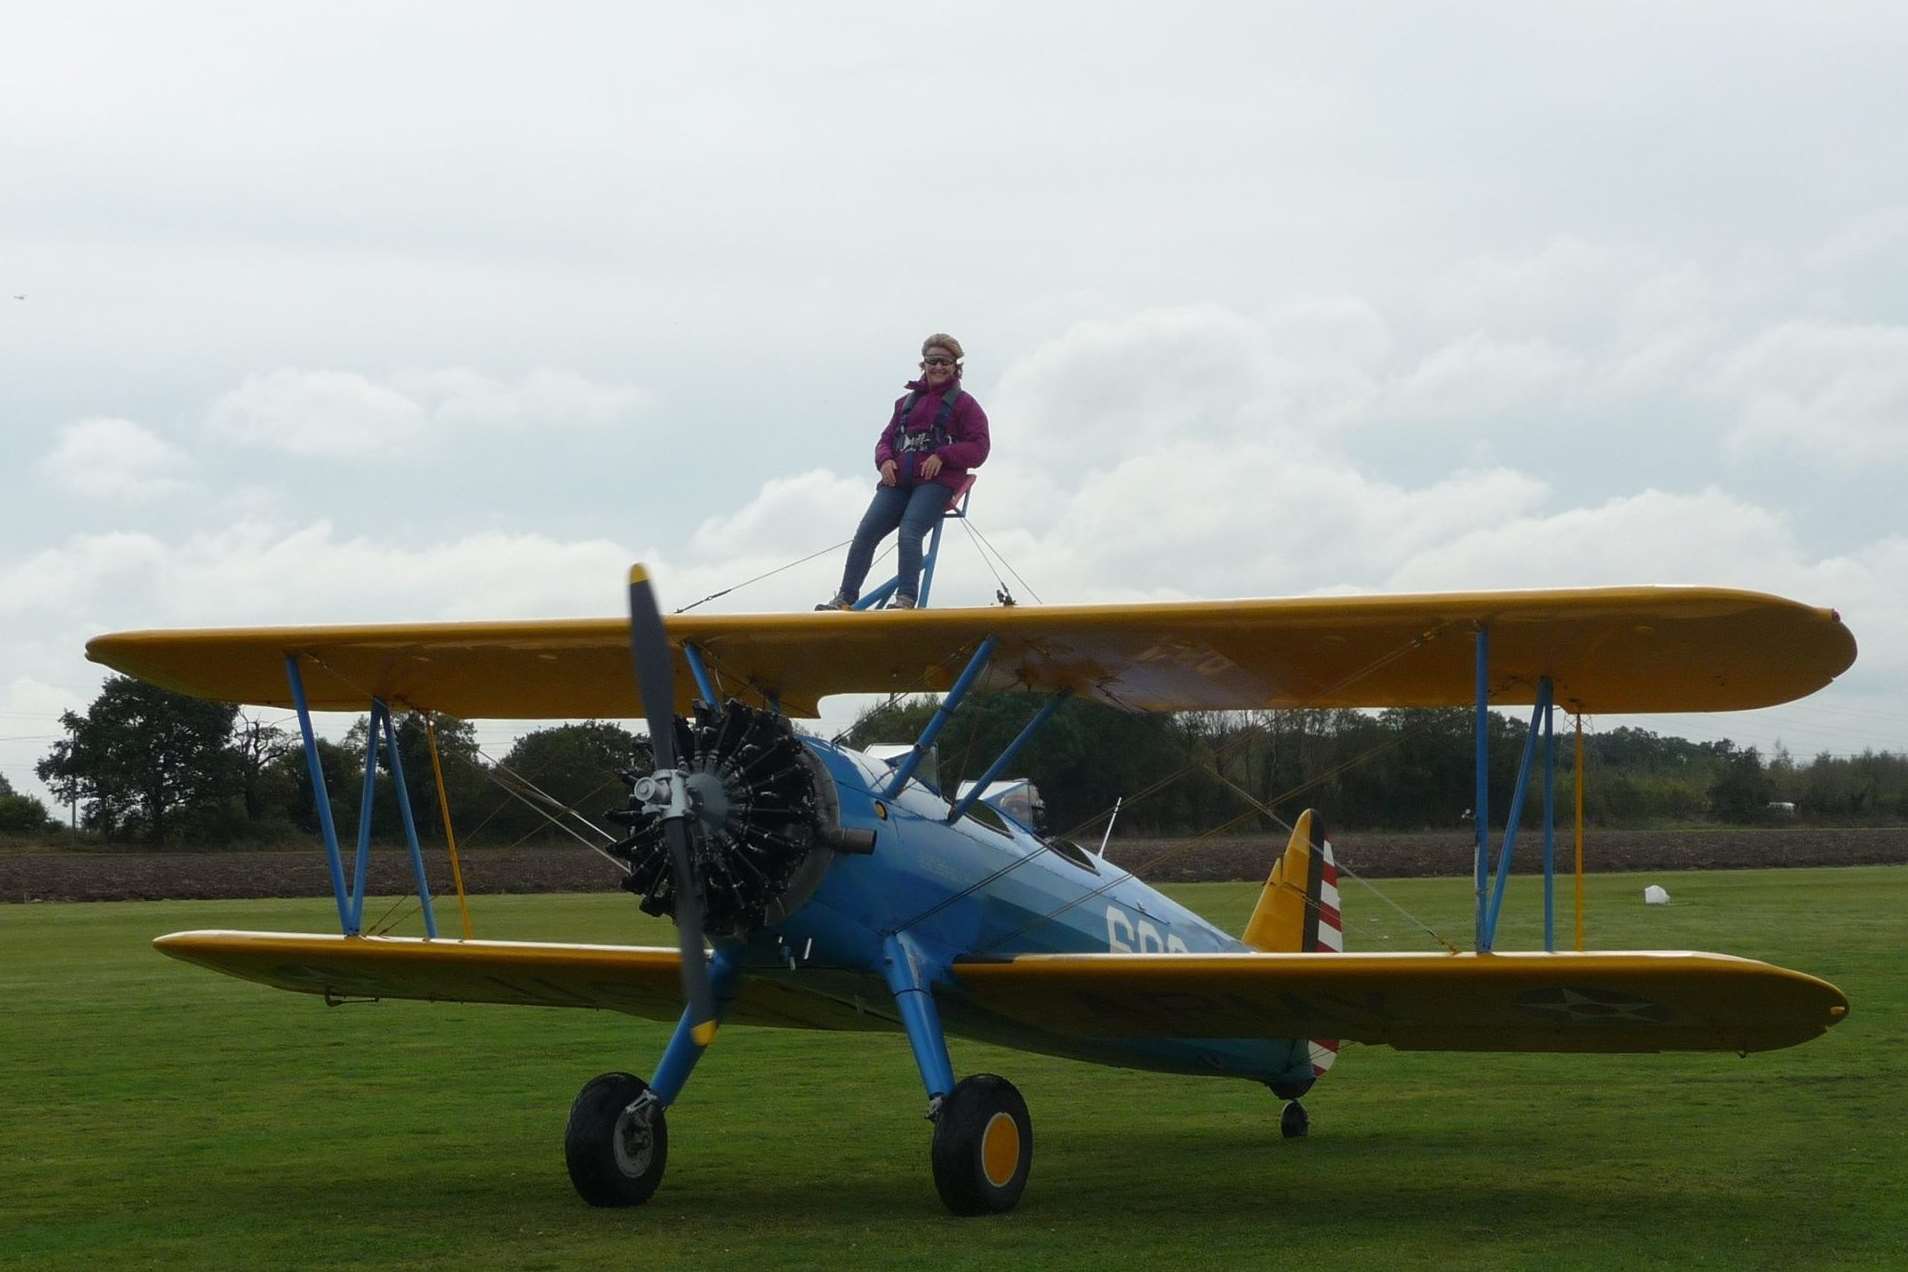 Joanne Aston took on various challenges after her diagnosis, including a sponsored wingwalk.